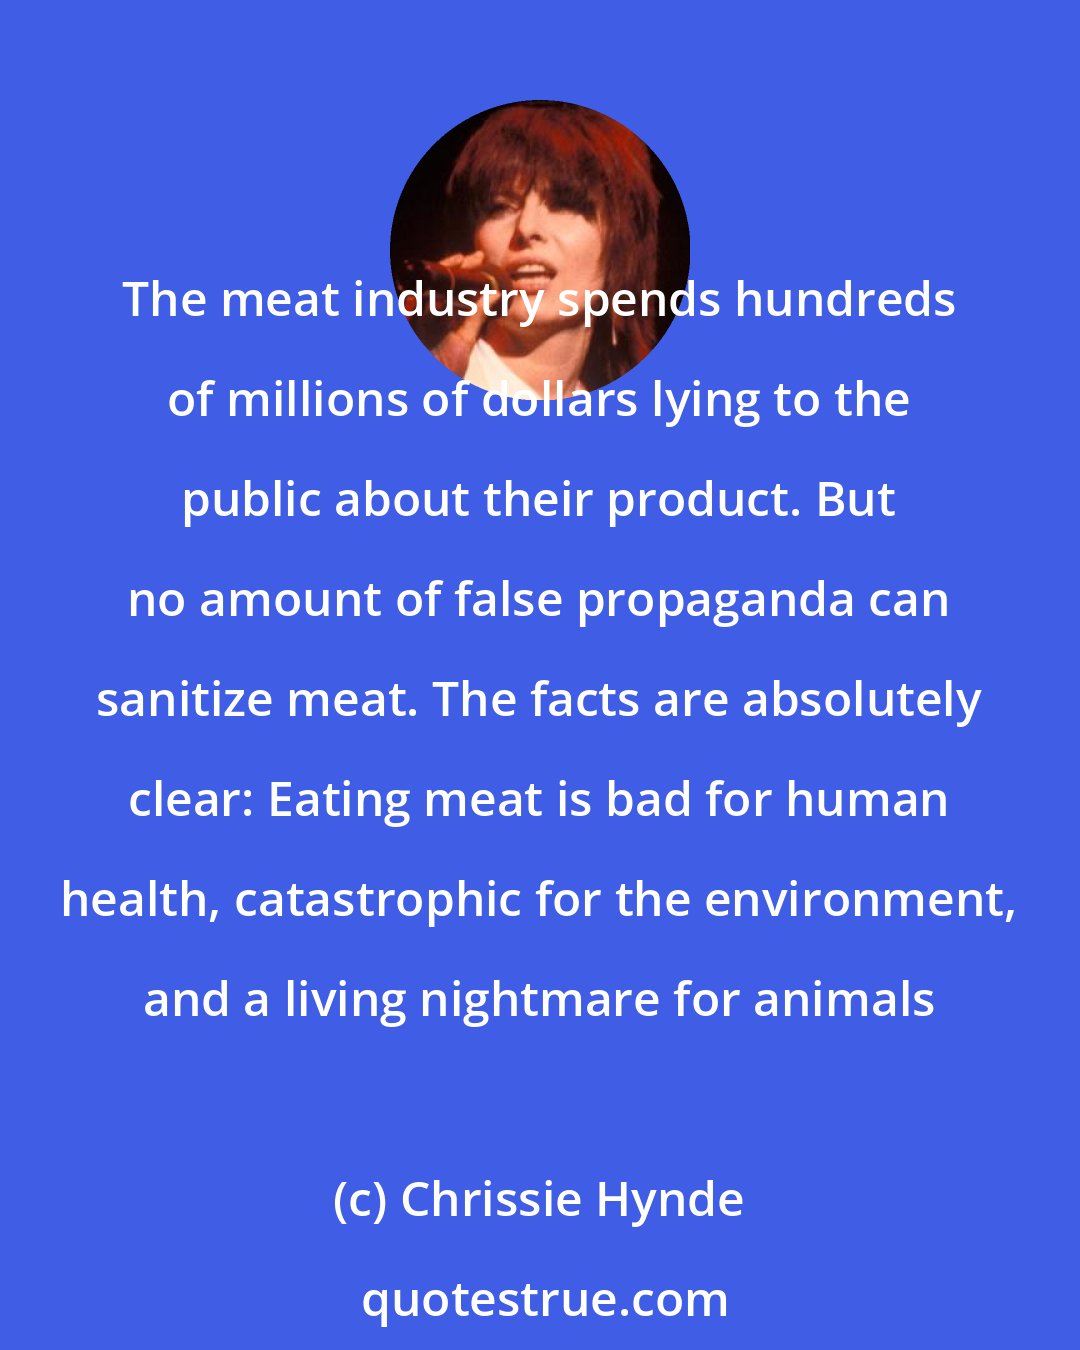 Chrissie Hynde: The meat industry spends hundreds of millions of dollars lying to the public about their product. But no amount of false propaganda can sanitize meat. The facts are absolutely clear: Eating meat is bad for human health, catastrophic for the environment, and a living nightmare for animals